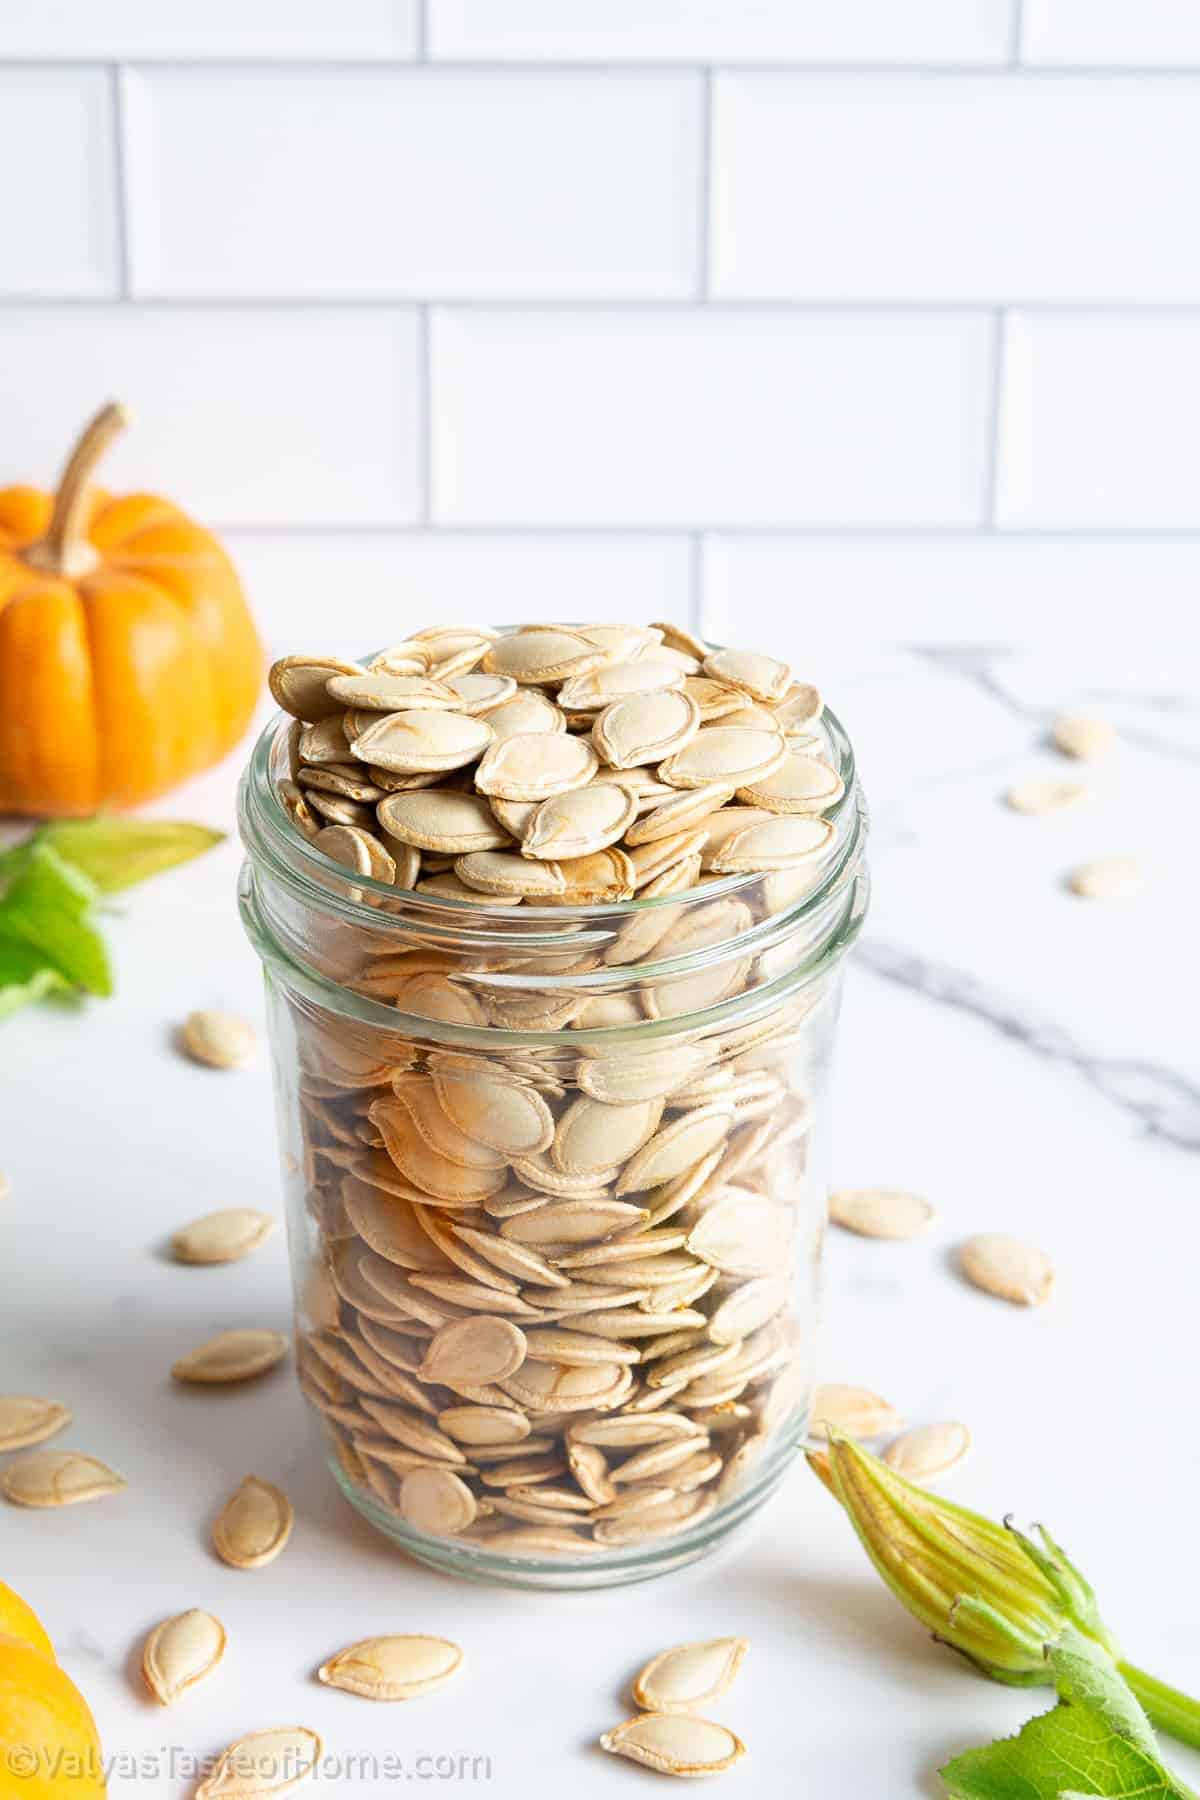 If you're carving pumpkins this fall, don't waste those seeds! Instead, try this super easy recipe for perfectly roasted pumpkin seeds for a healthy snack!